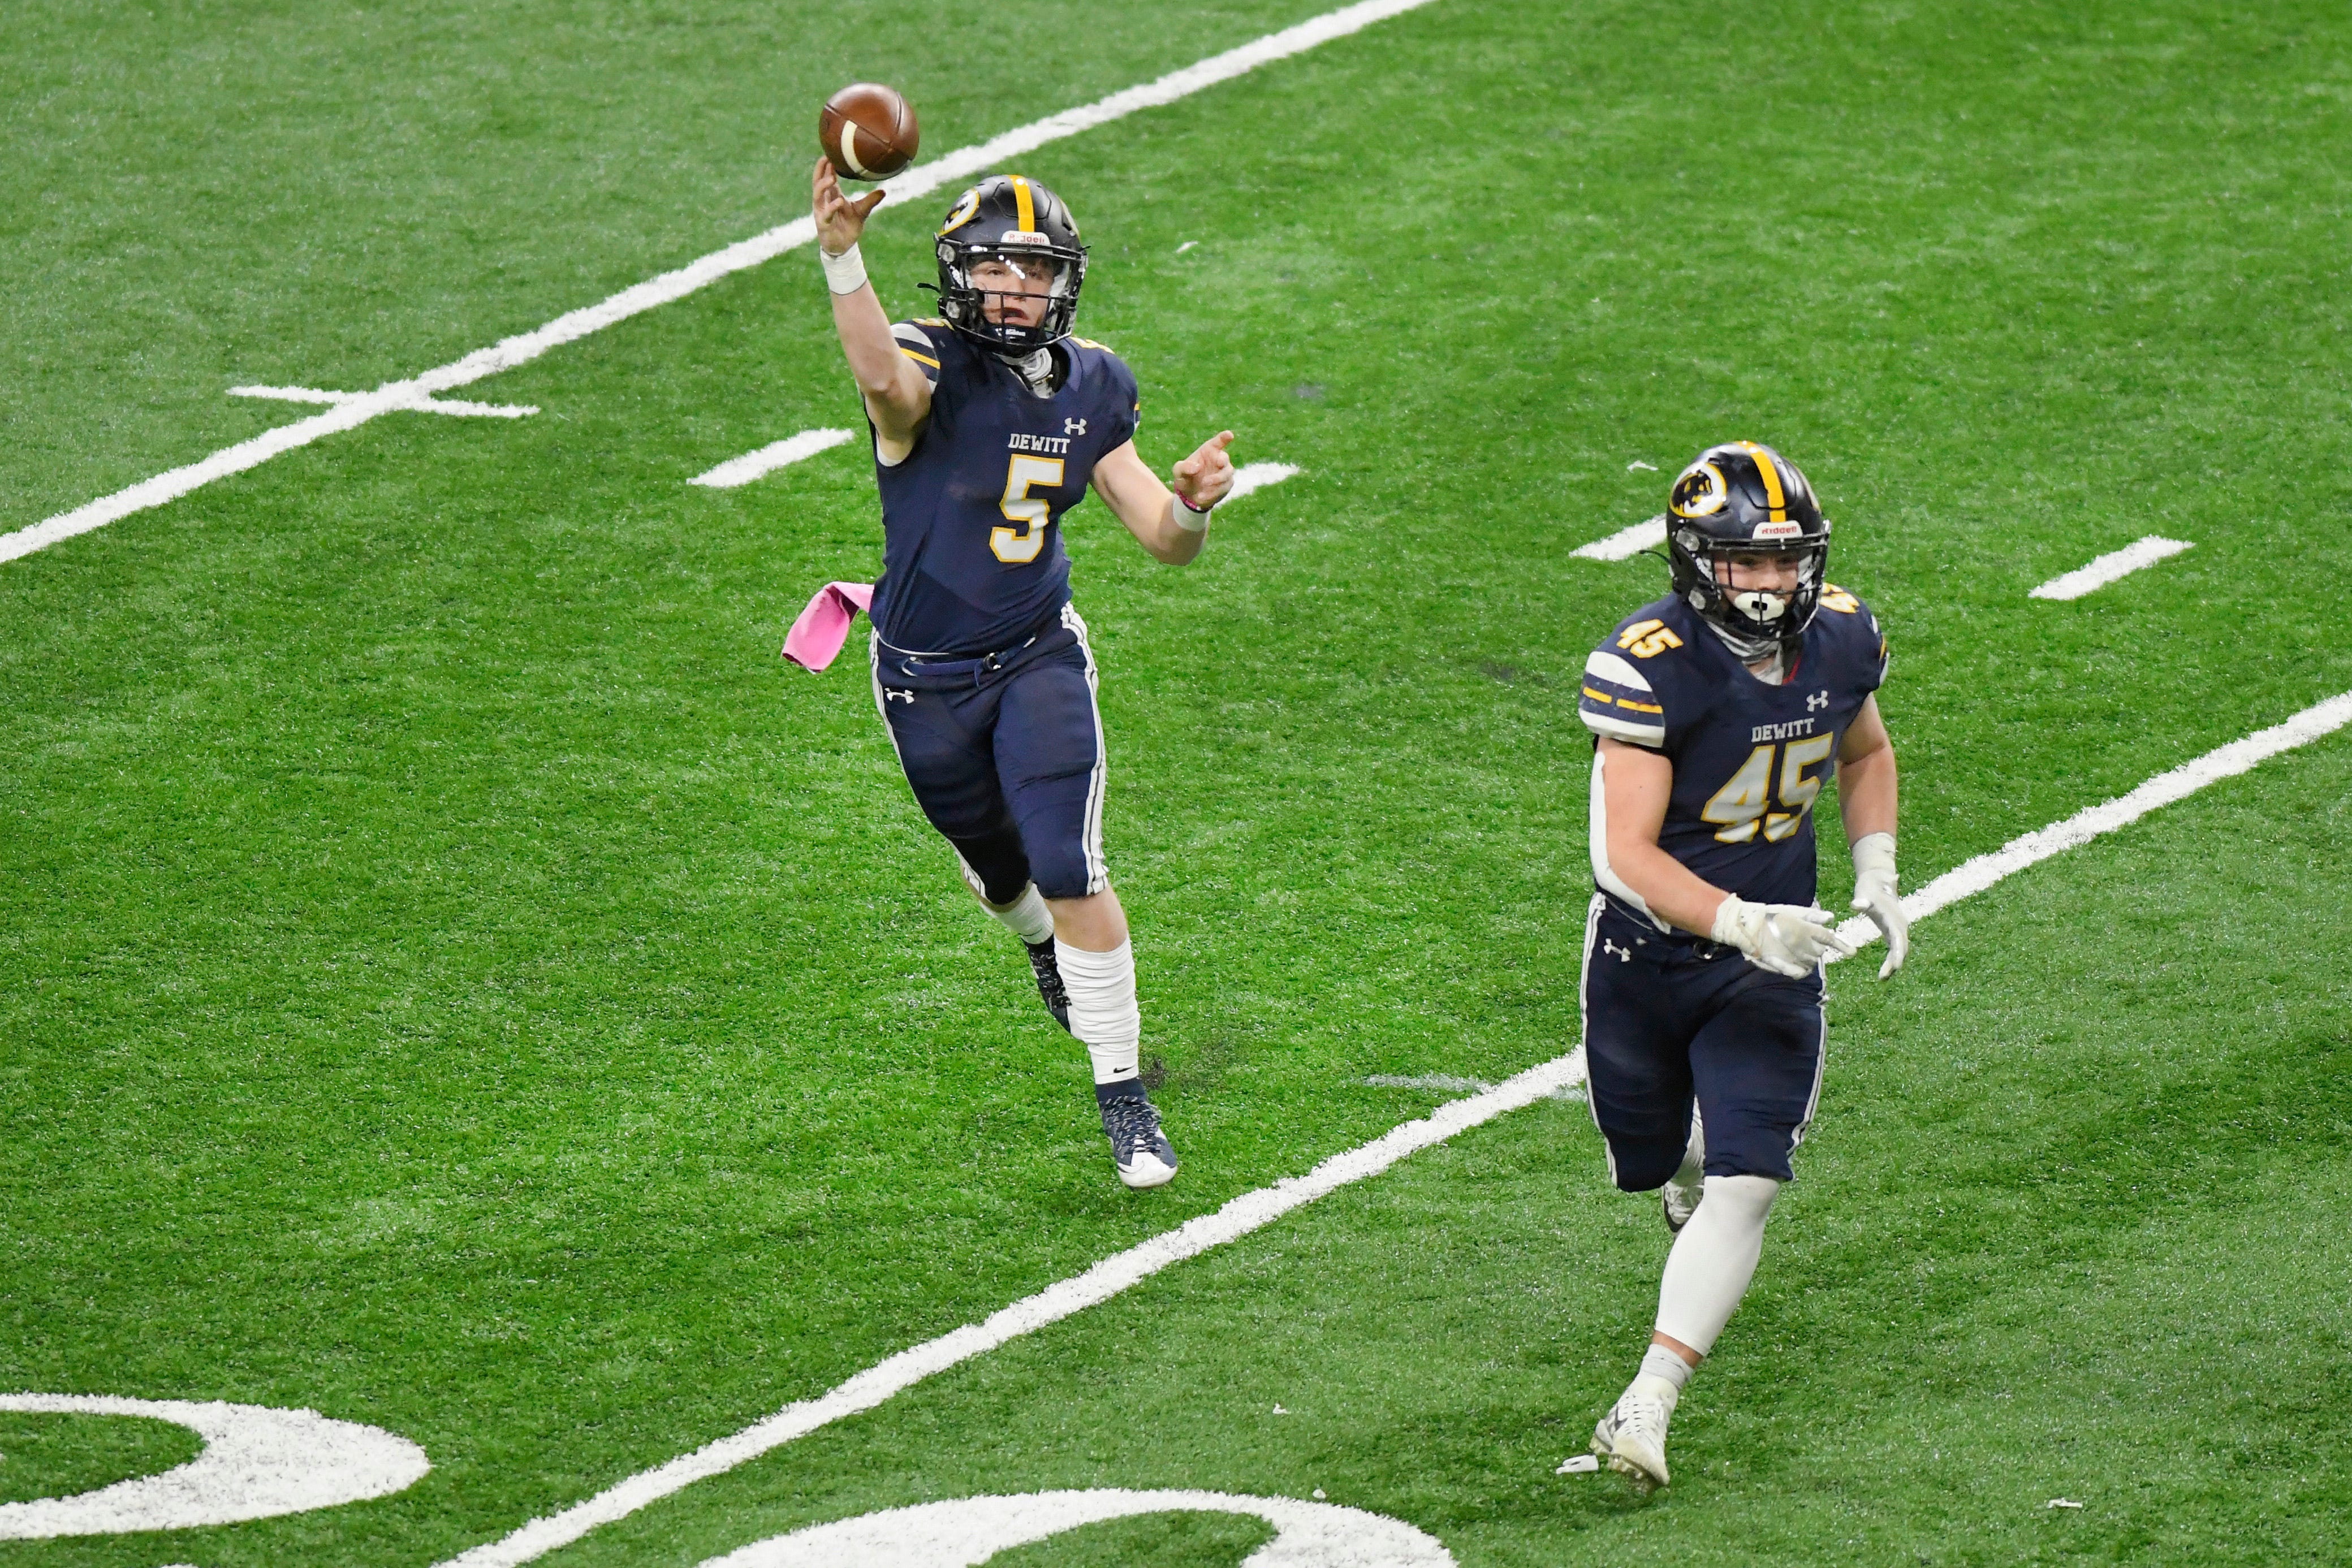 DeWitt quarterback Tyler Holtz passes against River Rouge in the second quarter of a Division 3 football final held at Ford Field.